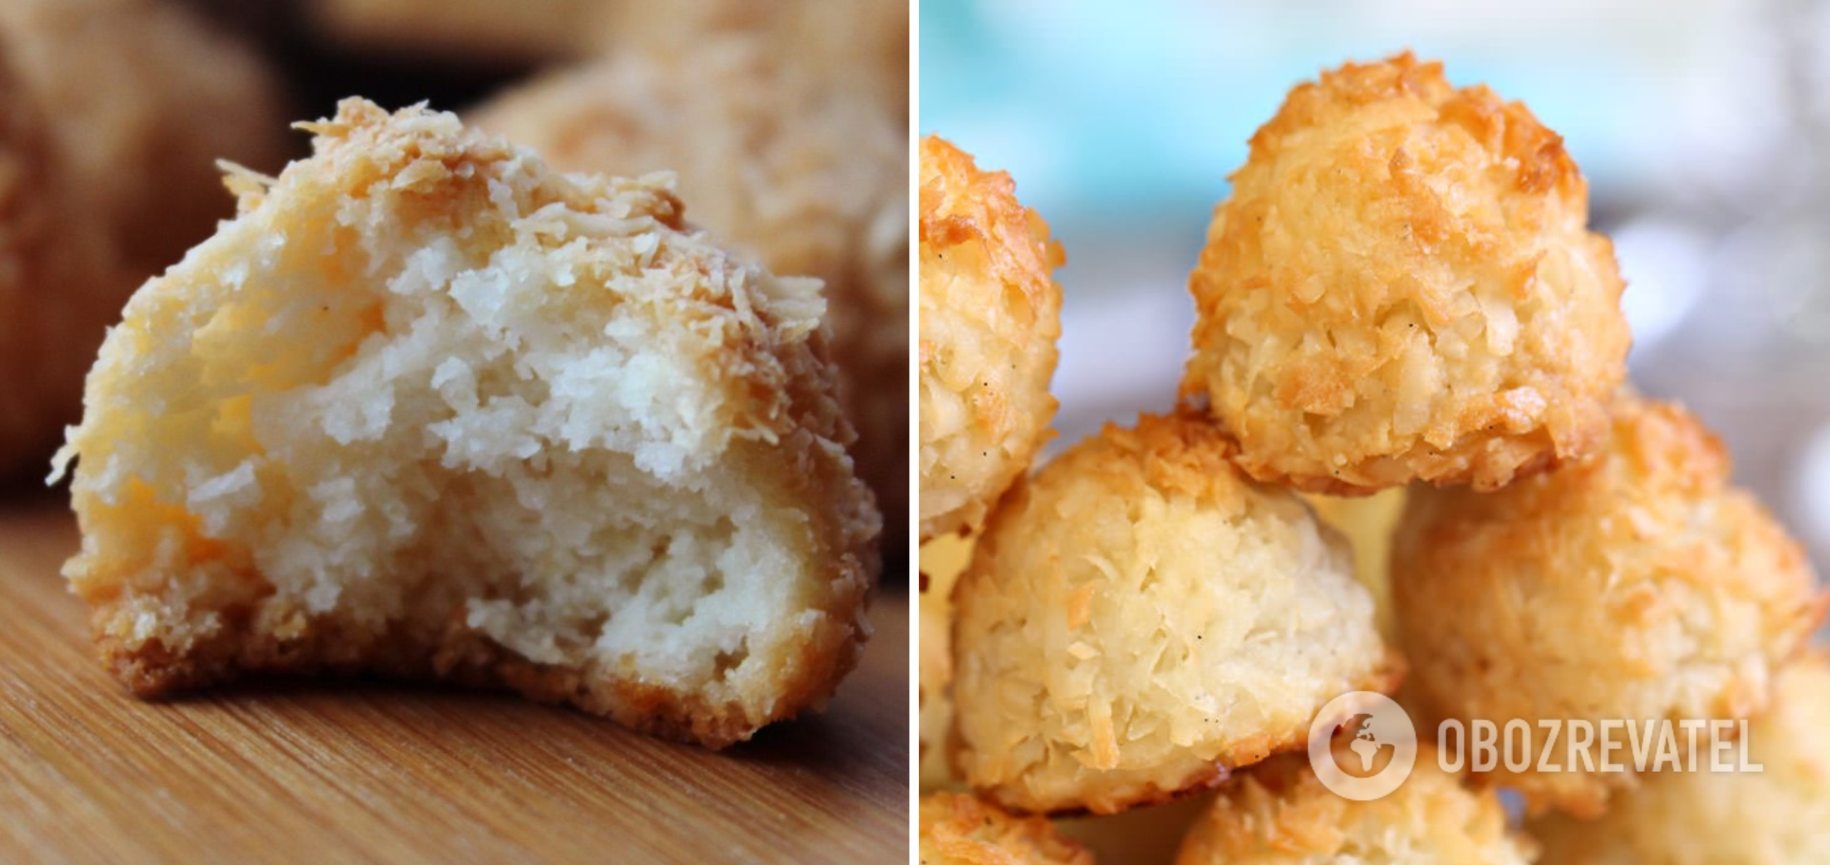 A simple recipe for coconut cookies